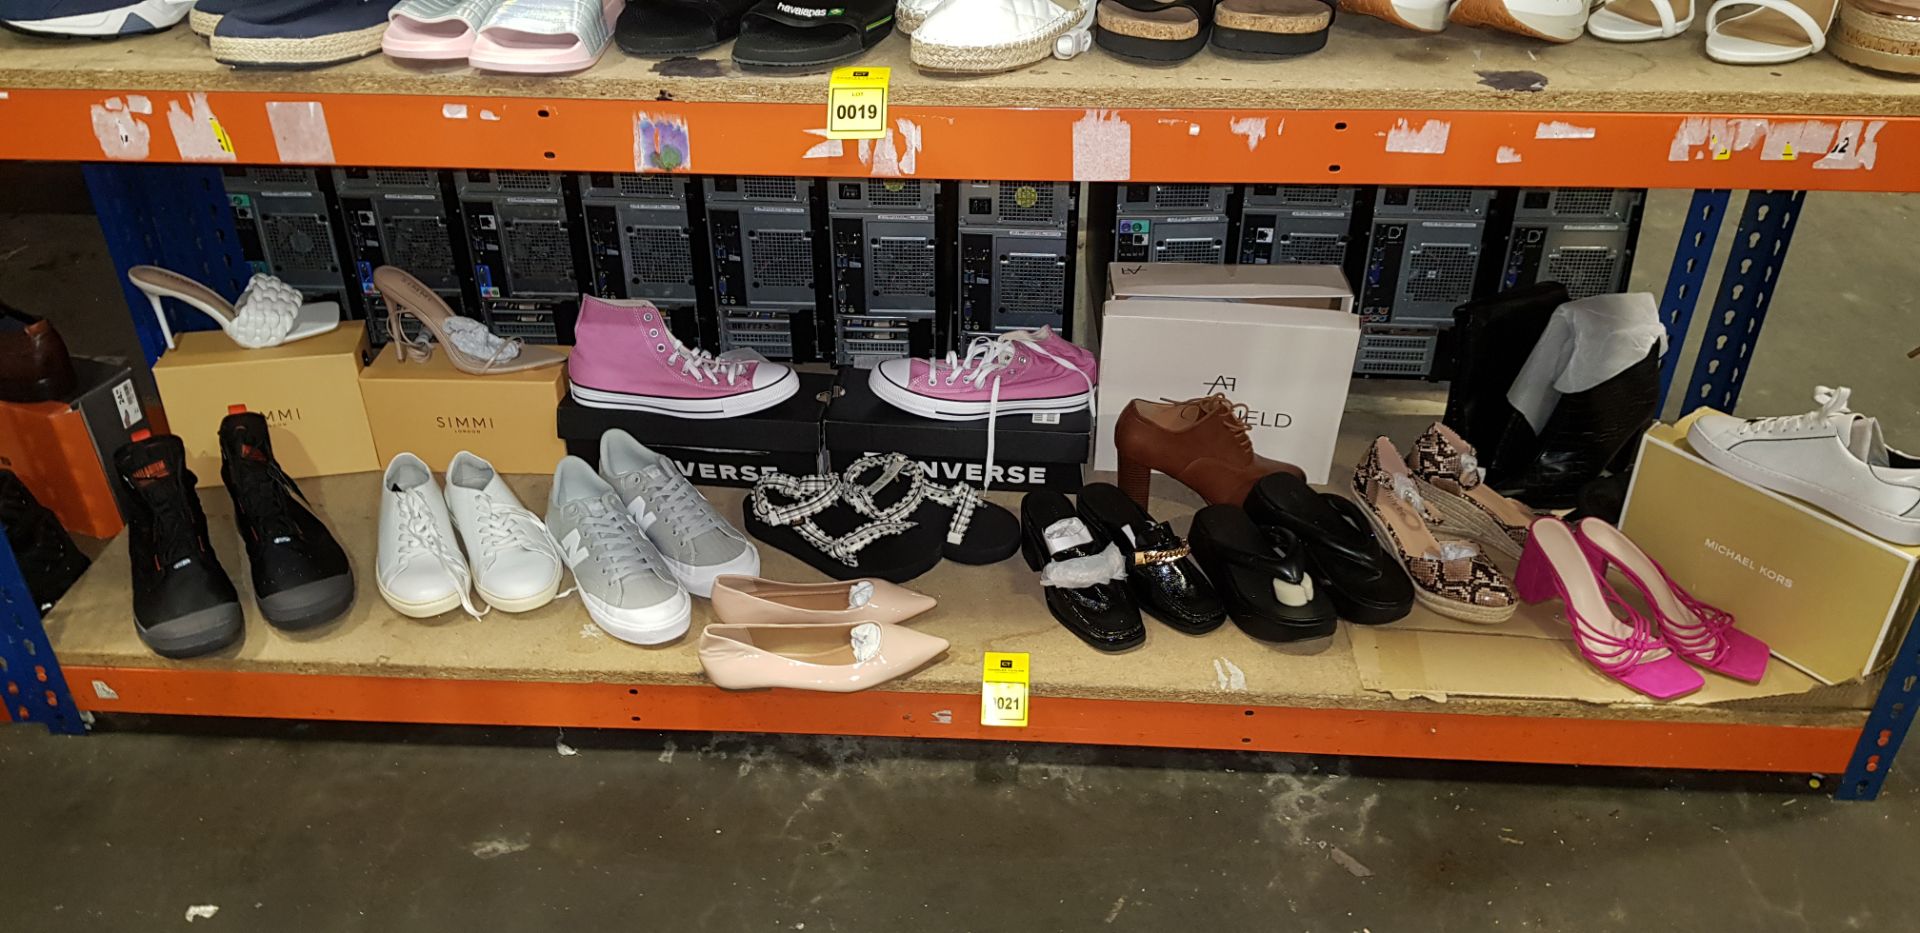 17 X PIECE BRAND NEW MIXED SHOE LOT CONTAINING MICHEAL KORS TRAINERS, CONVERSE PINK HI-TOPS, NEW